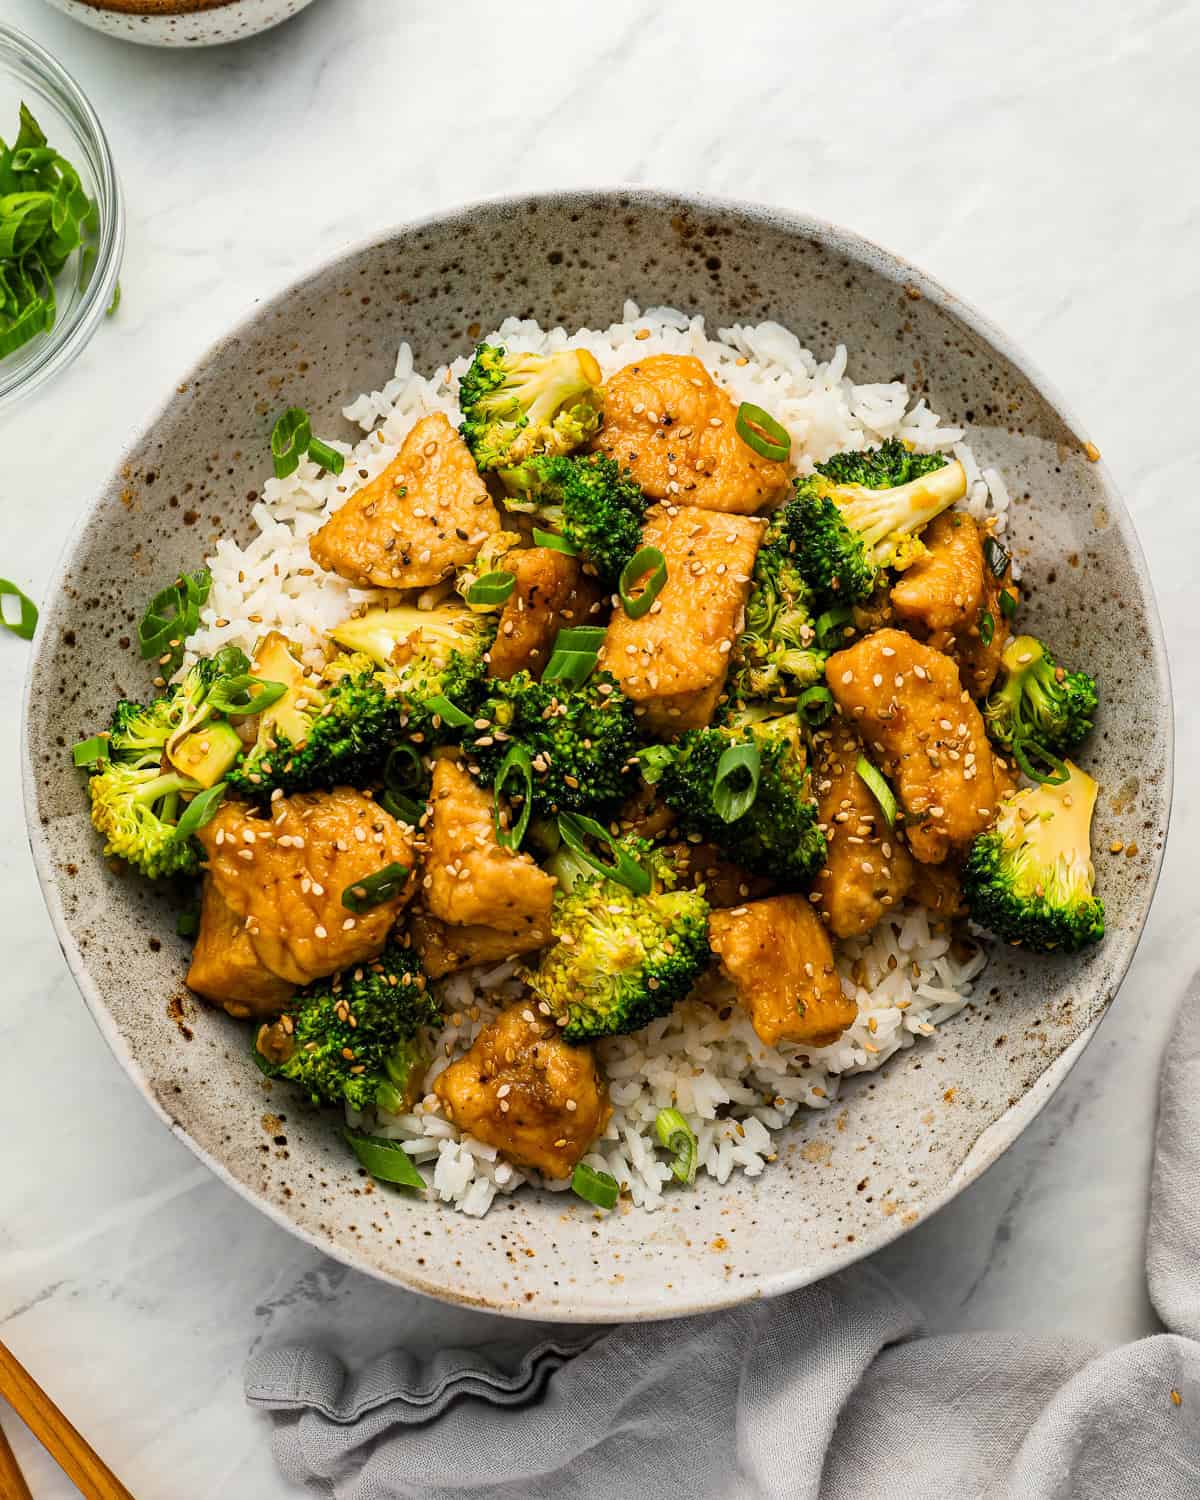 A bowl of chicken and broccoli stir fry served over white rice with green onions and sesame seeds.